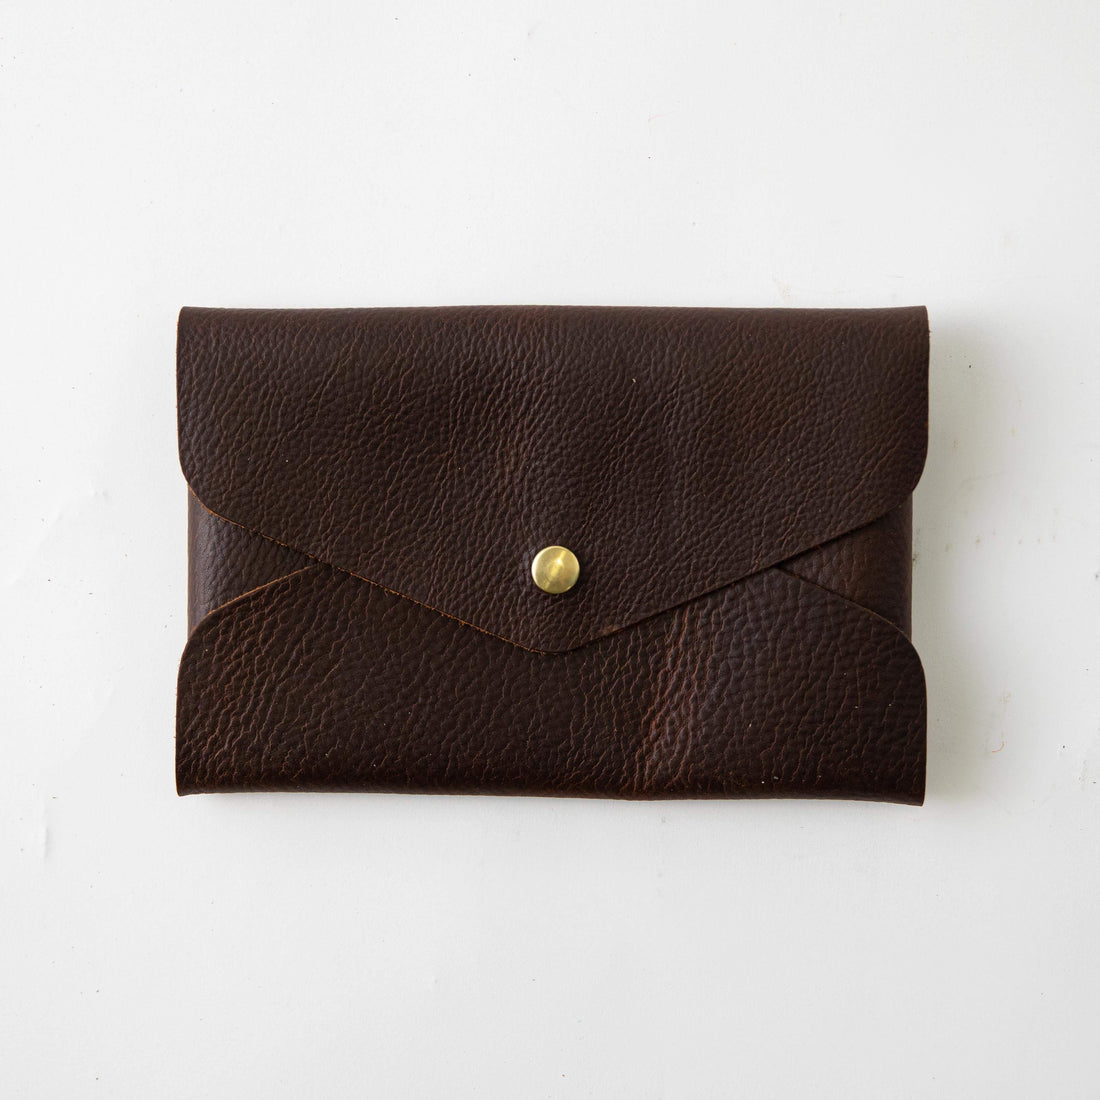 Leatherology Leather Envelope Clutch